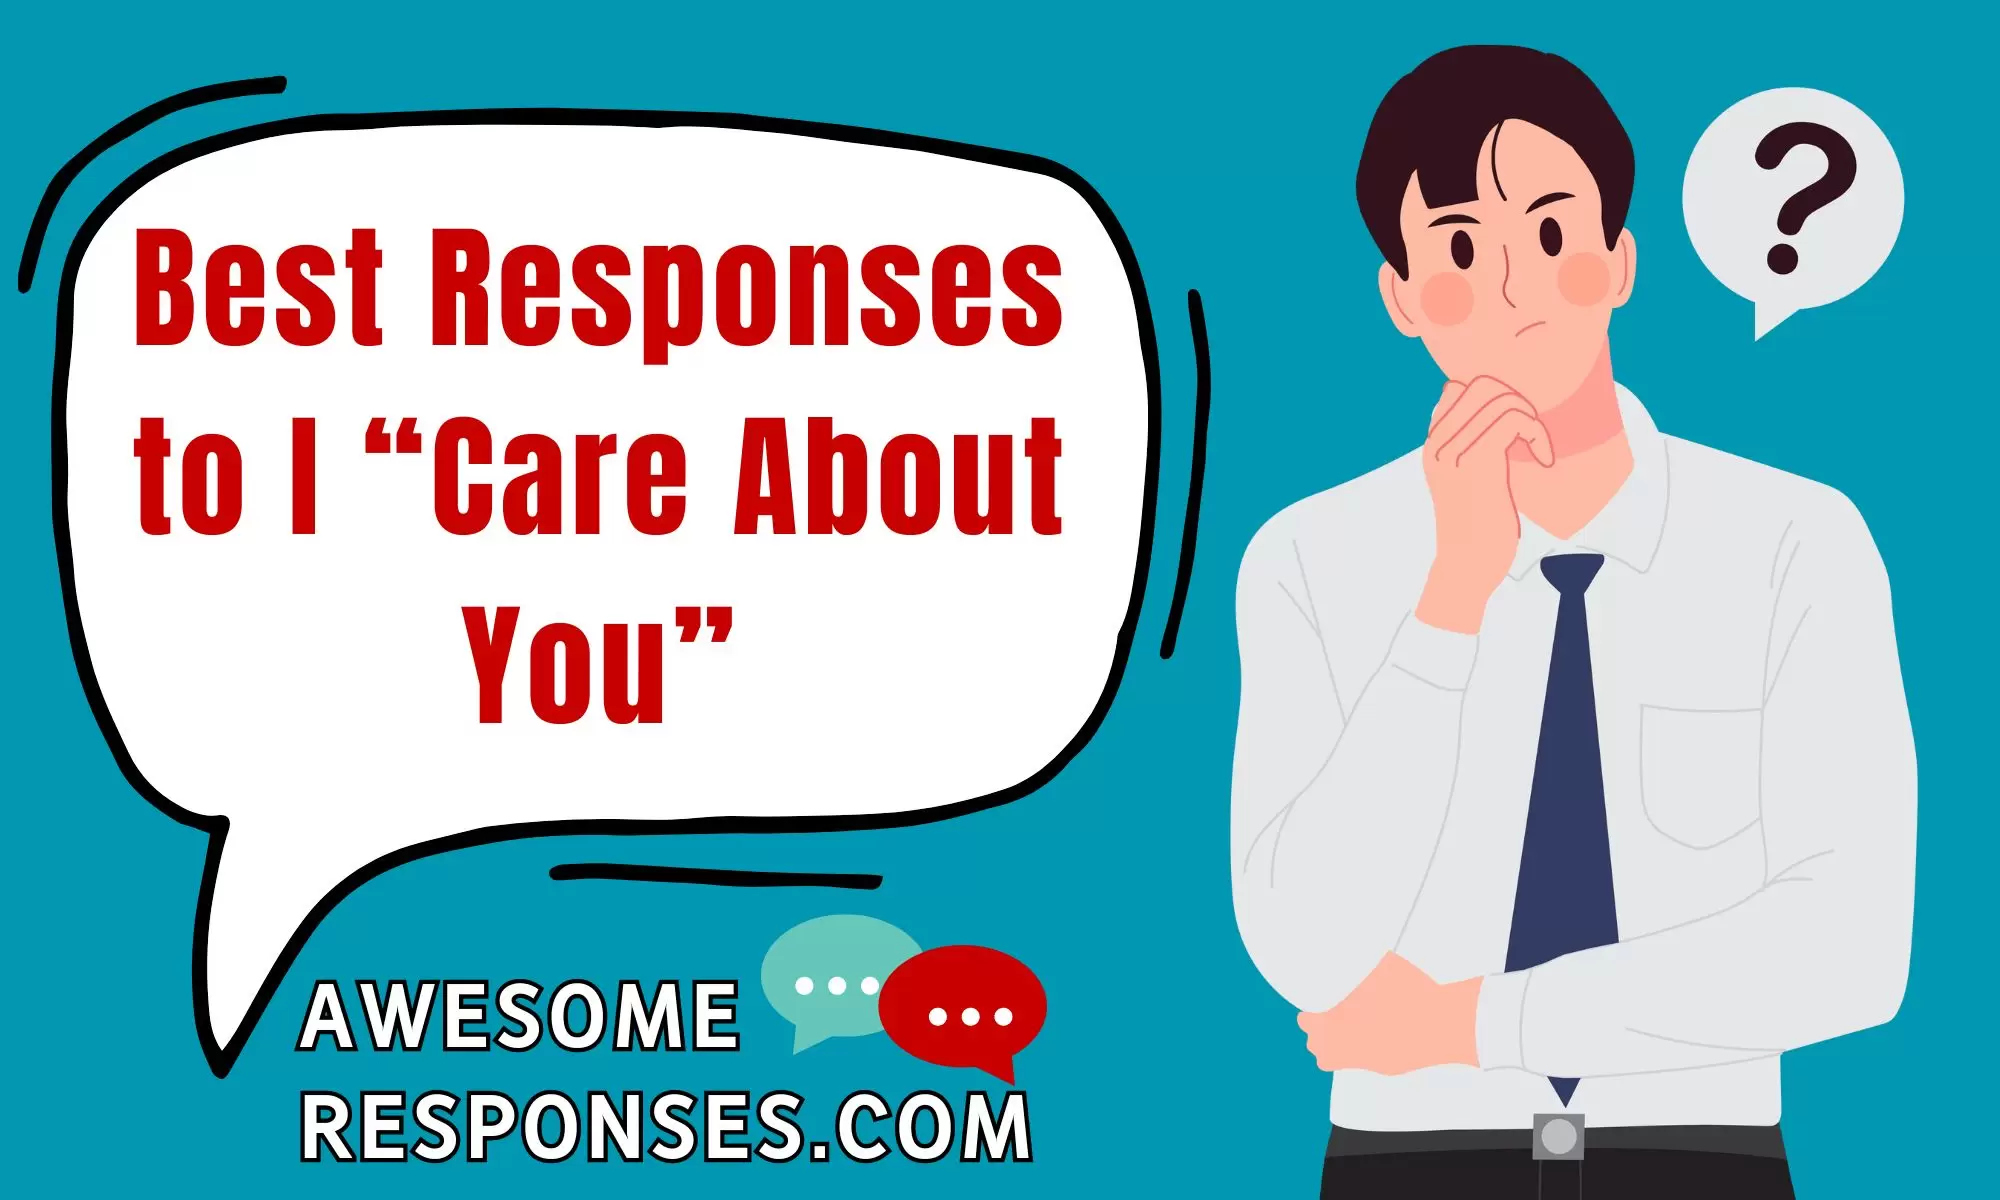 Best Responses to I “Care About You”